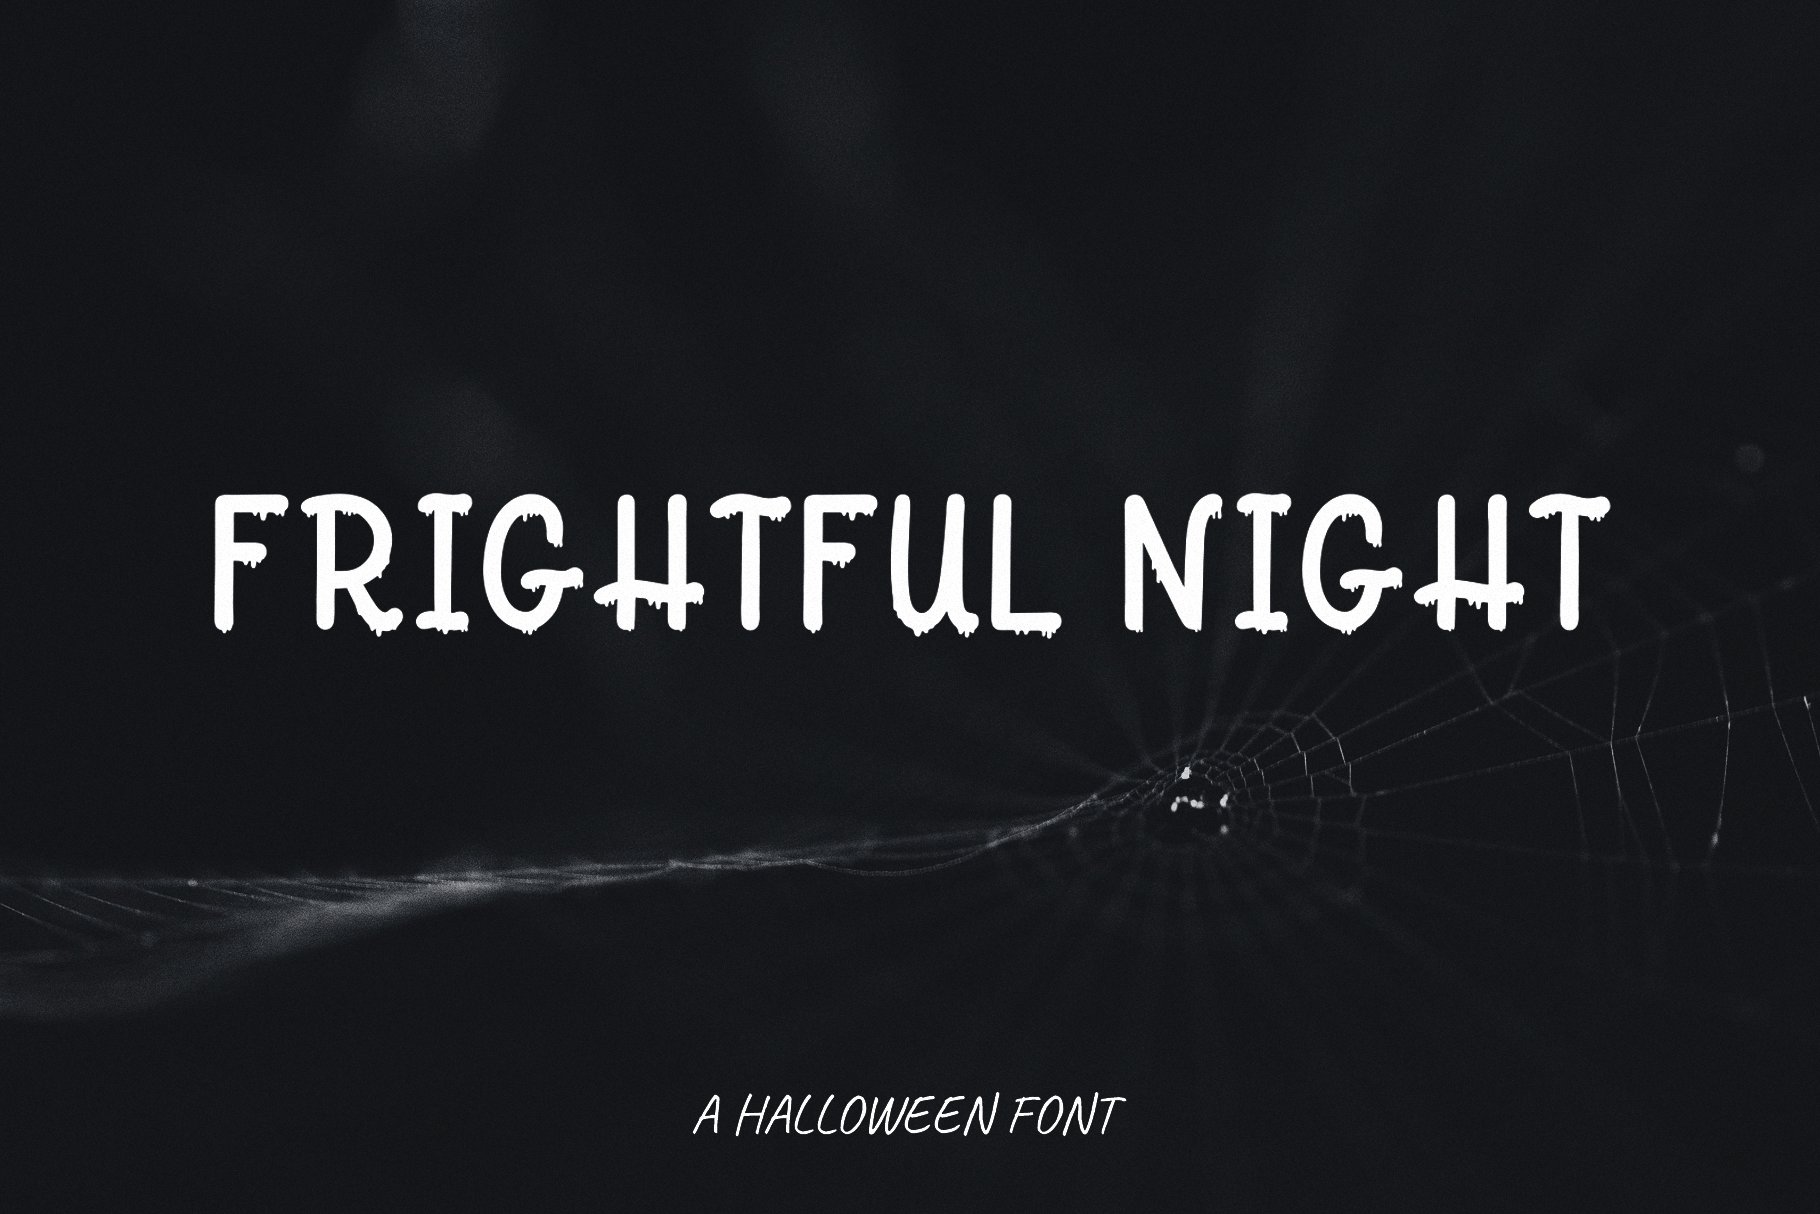 Frightful night - a Halloween font cover image.